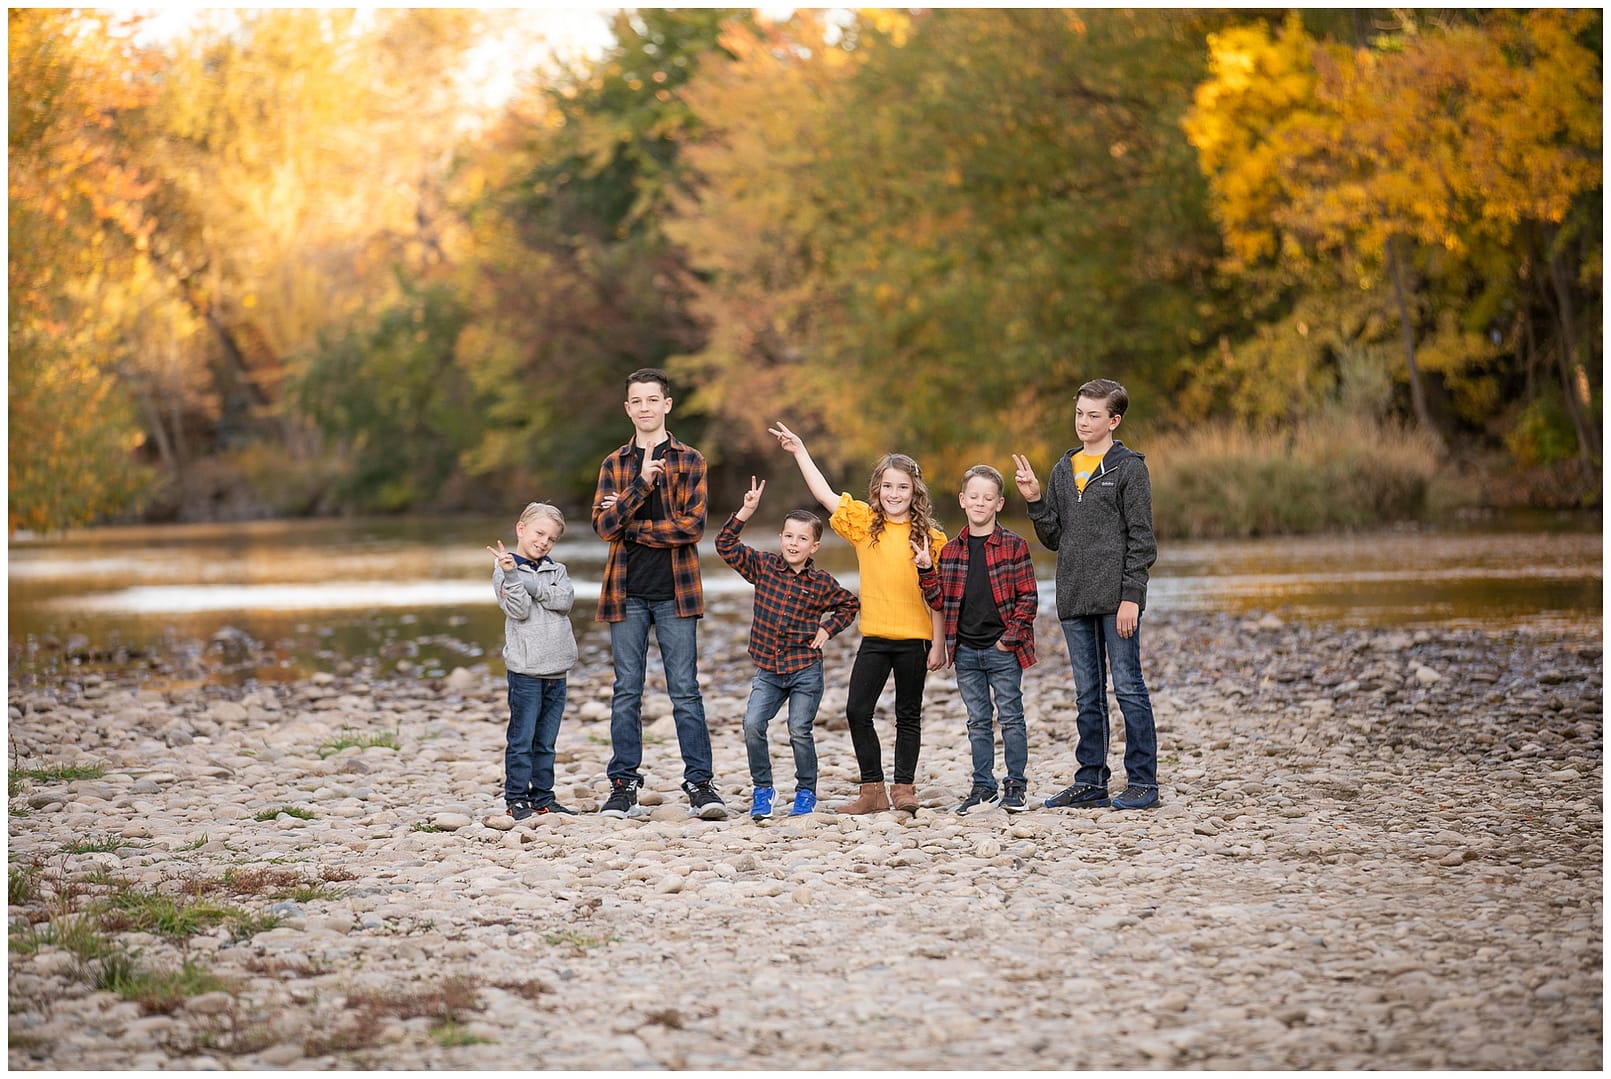 Boise kids acting silly in front of river. Photos by Tiffany Hix Photography.